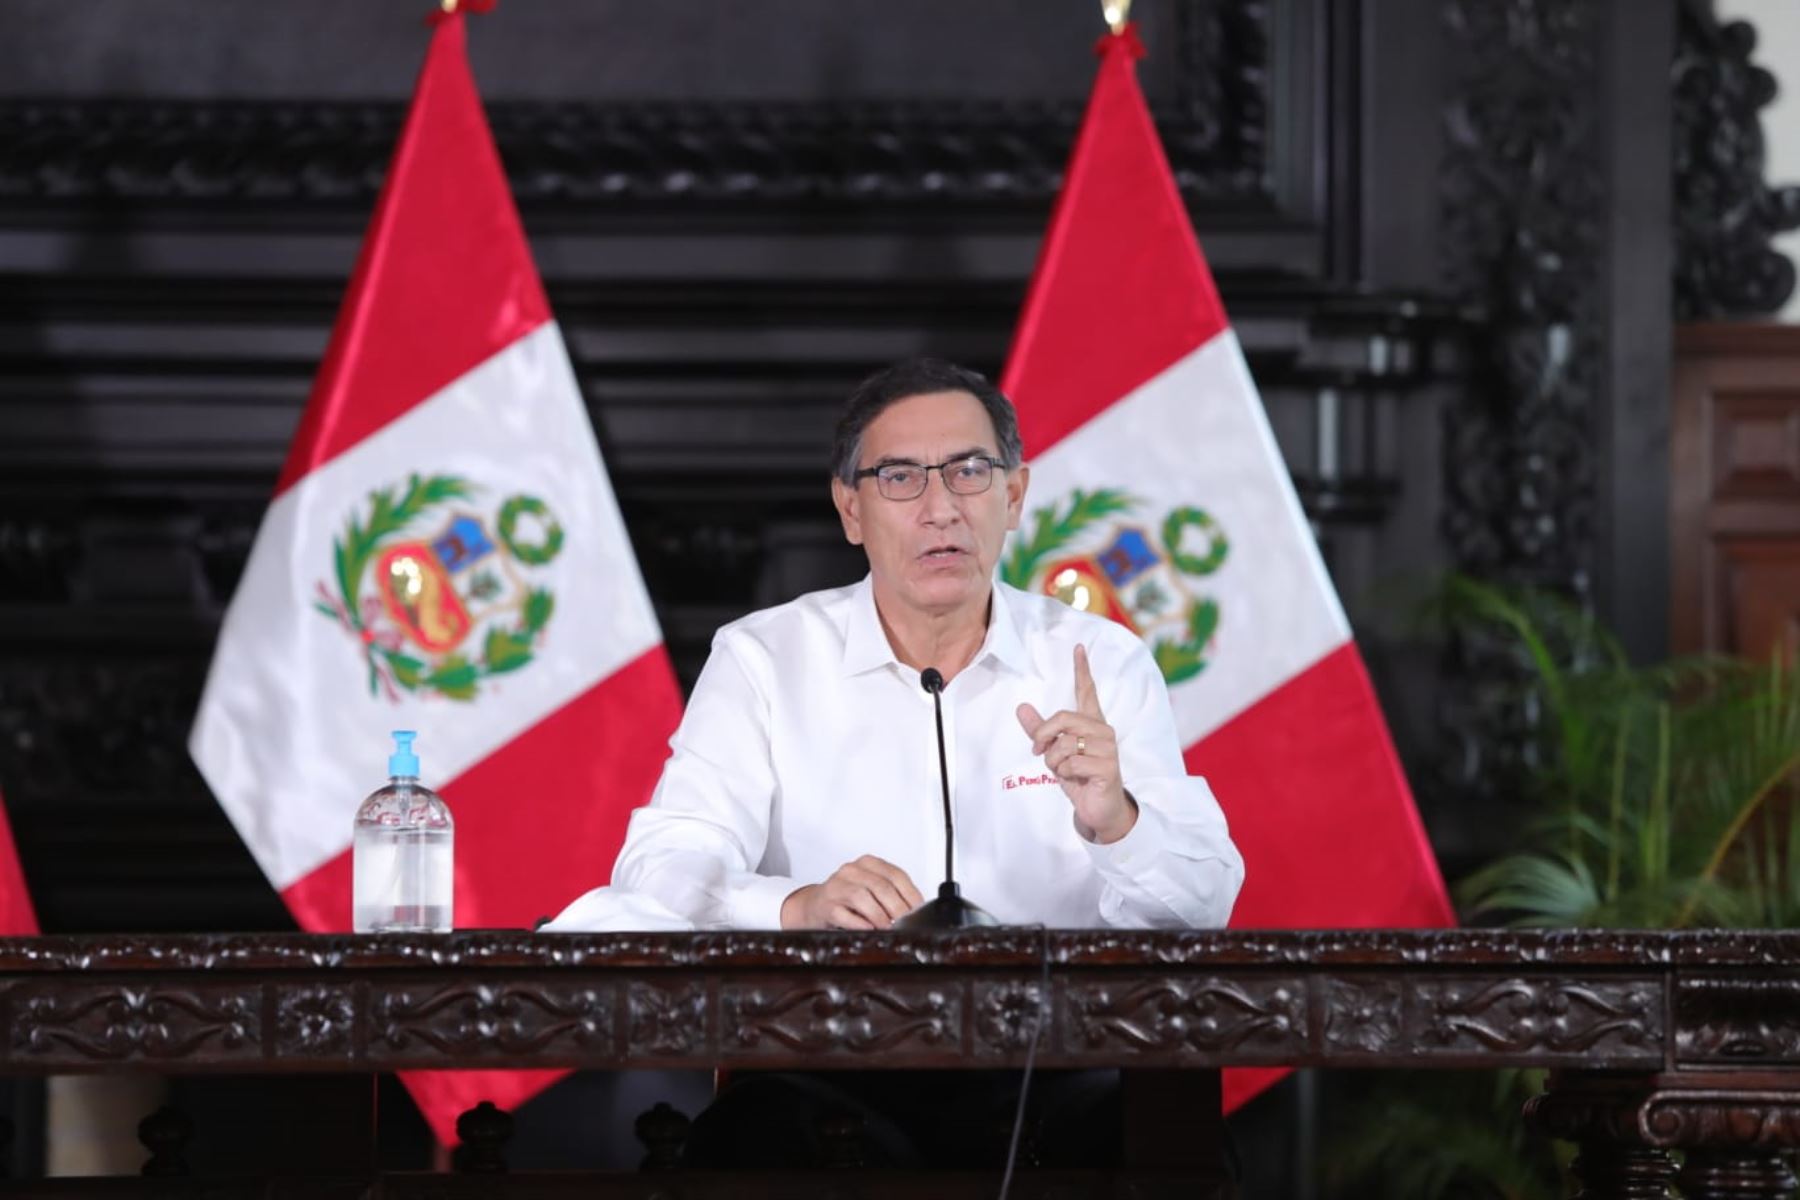 Peruvian President Martin Vizcarra addresses media outlets from the Government Palace in Lima. Photo: ANDINA/Presidency of the Republic